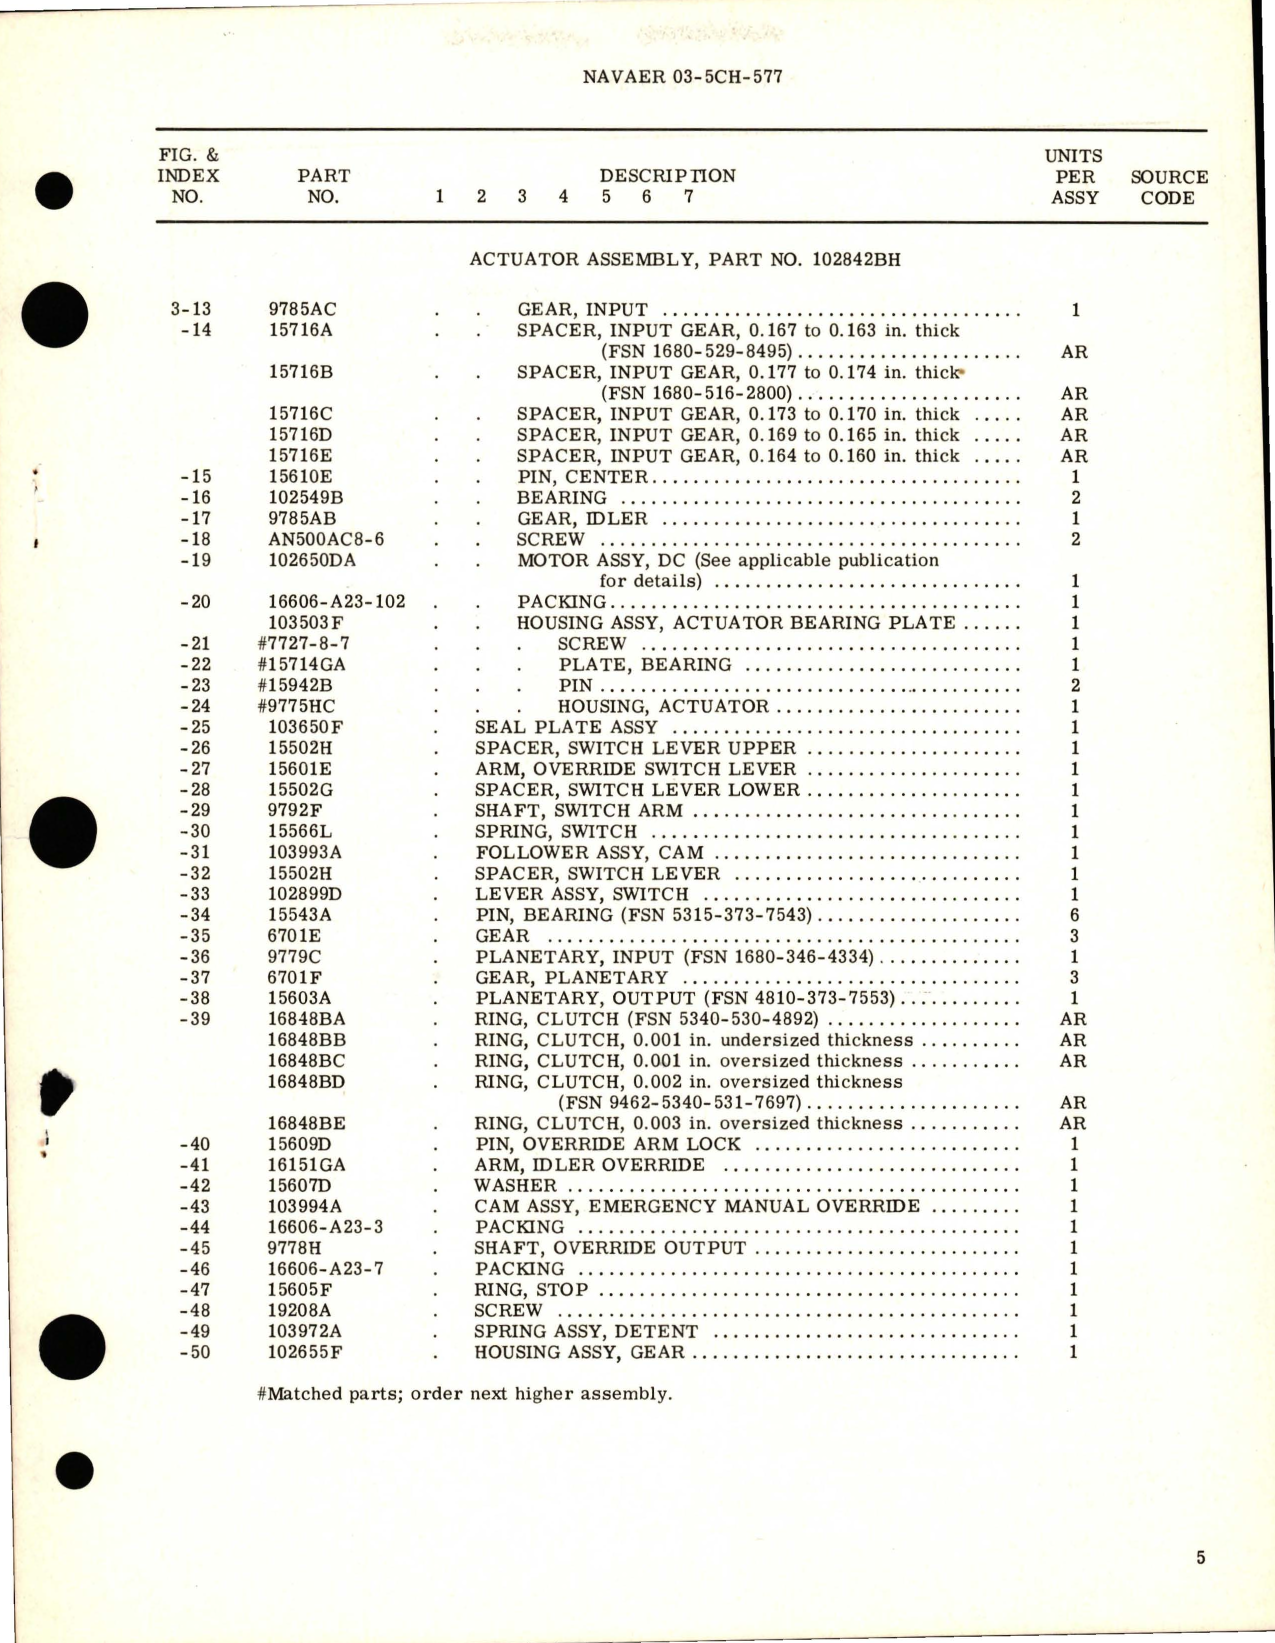 Sample page 5 from AirCorps Library document: Overhaul Instructions with Parts Breakdown for Actuator Assembly - Part 102842BH